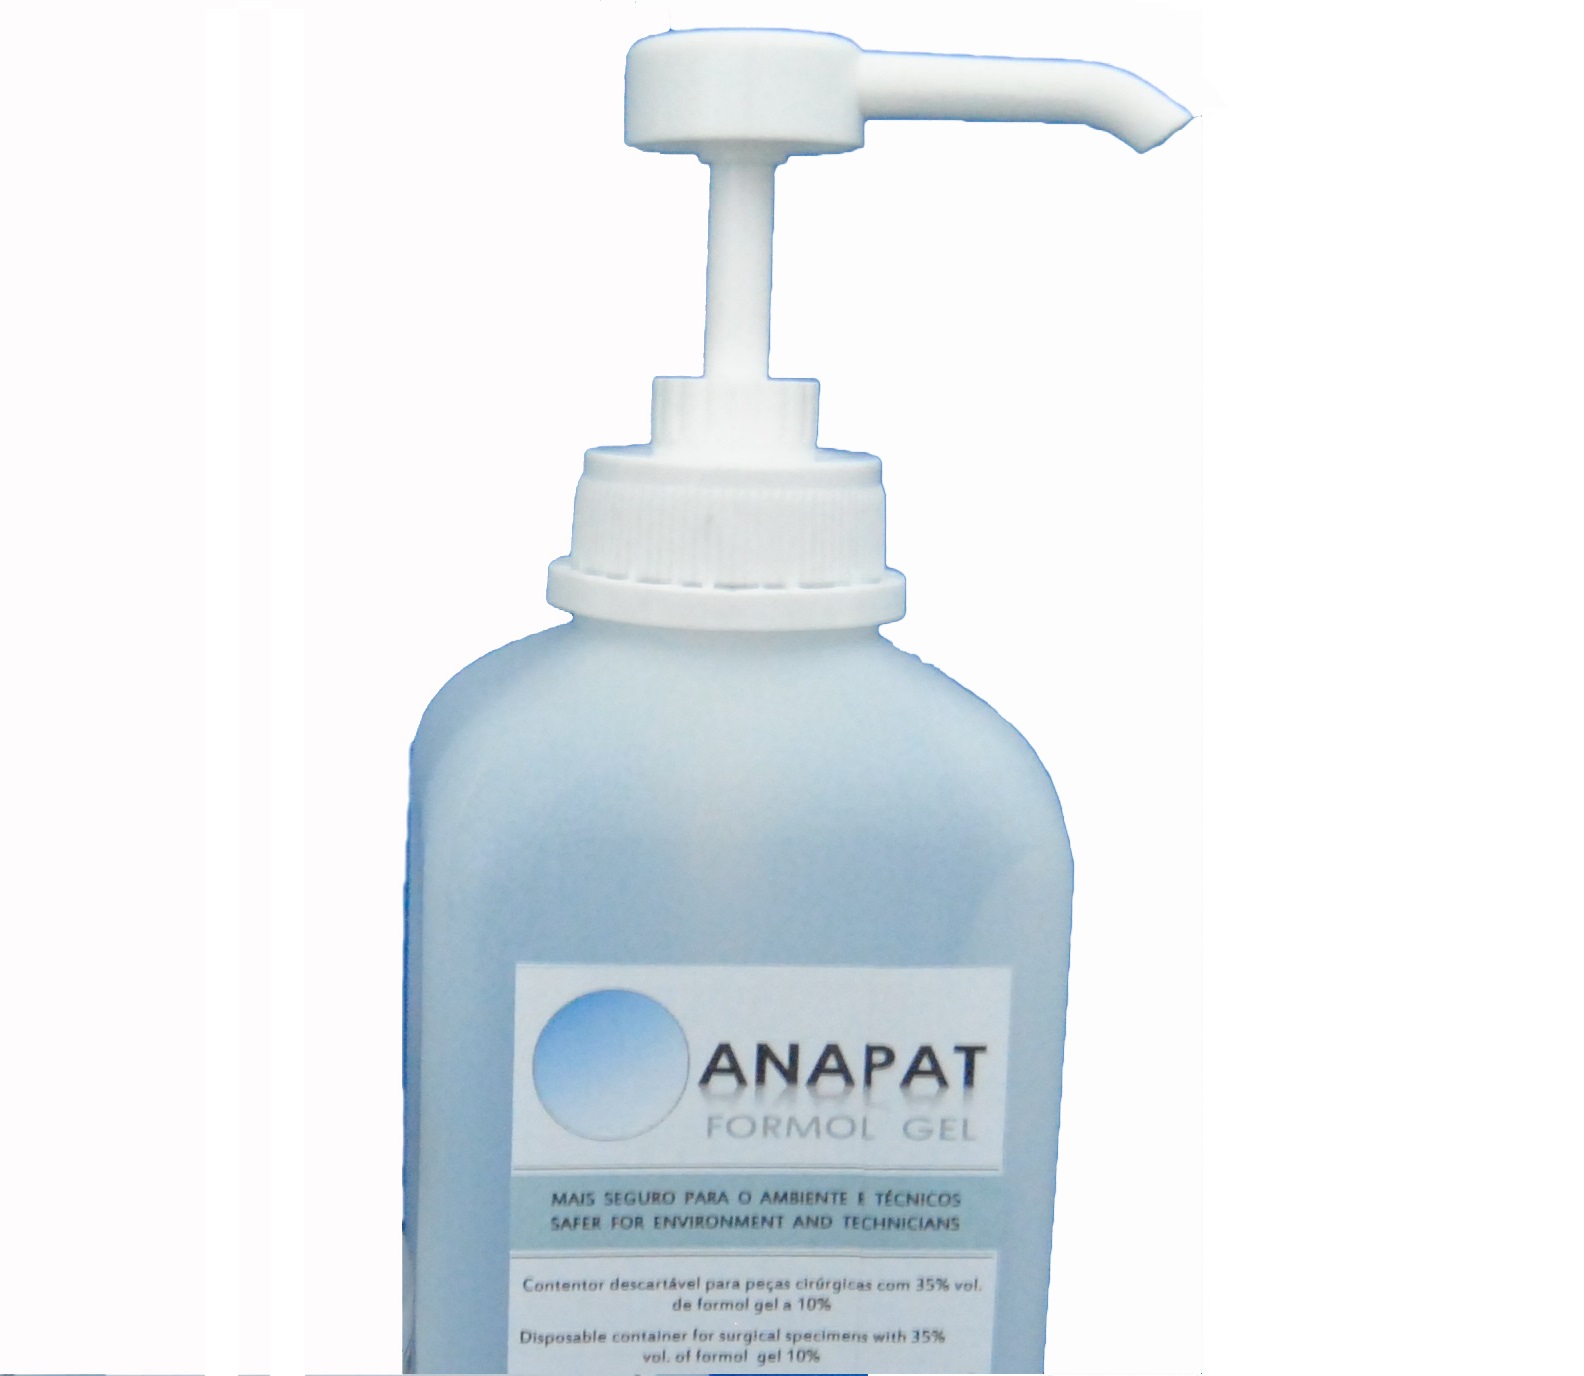 ANAPAT Formol Gel - 1000ml bottle with Dispenser